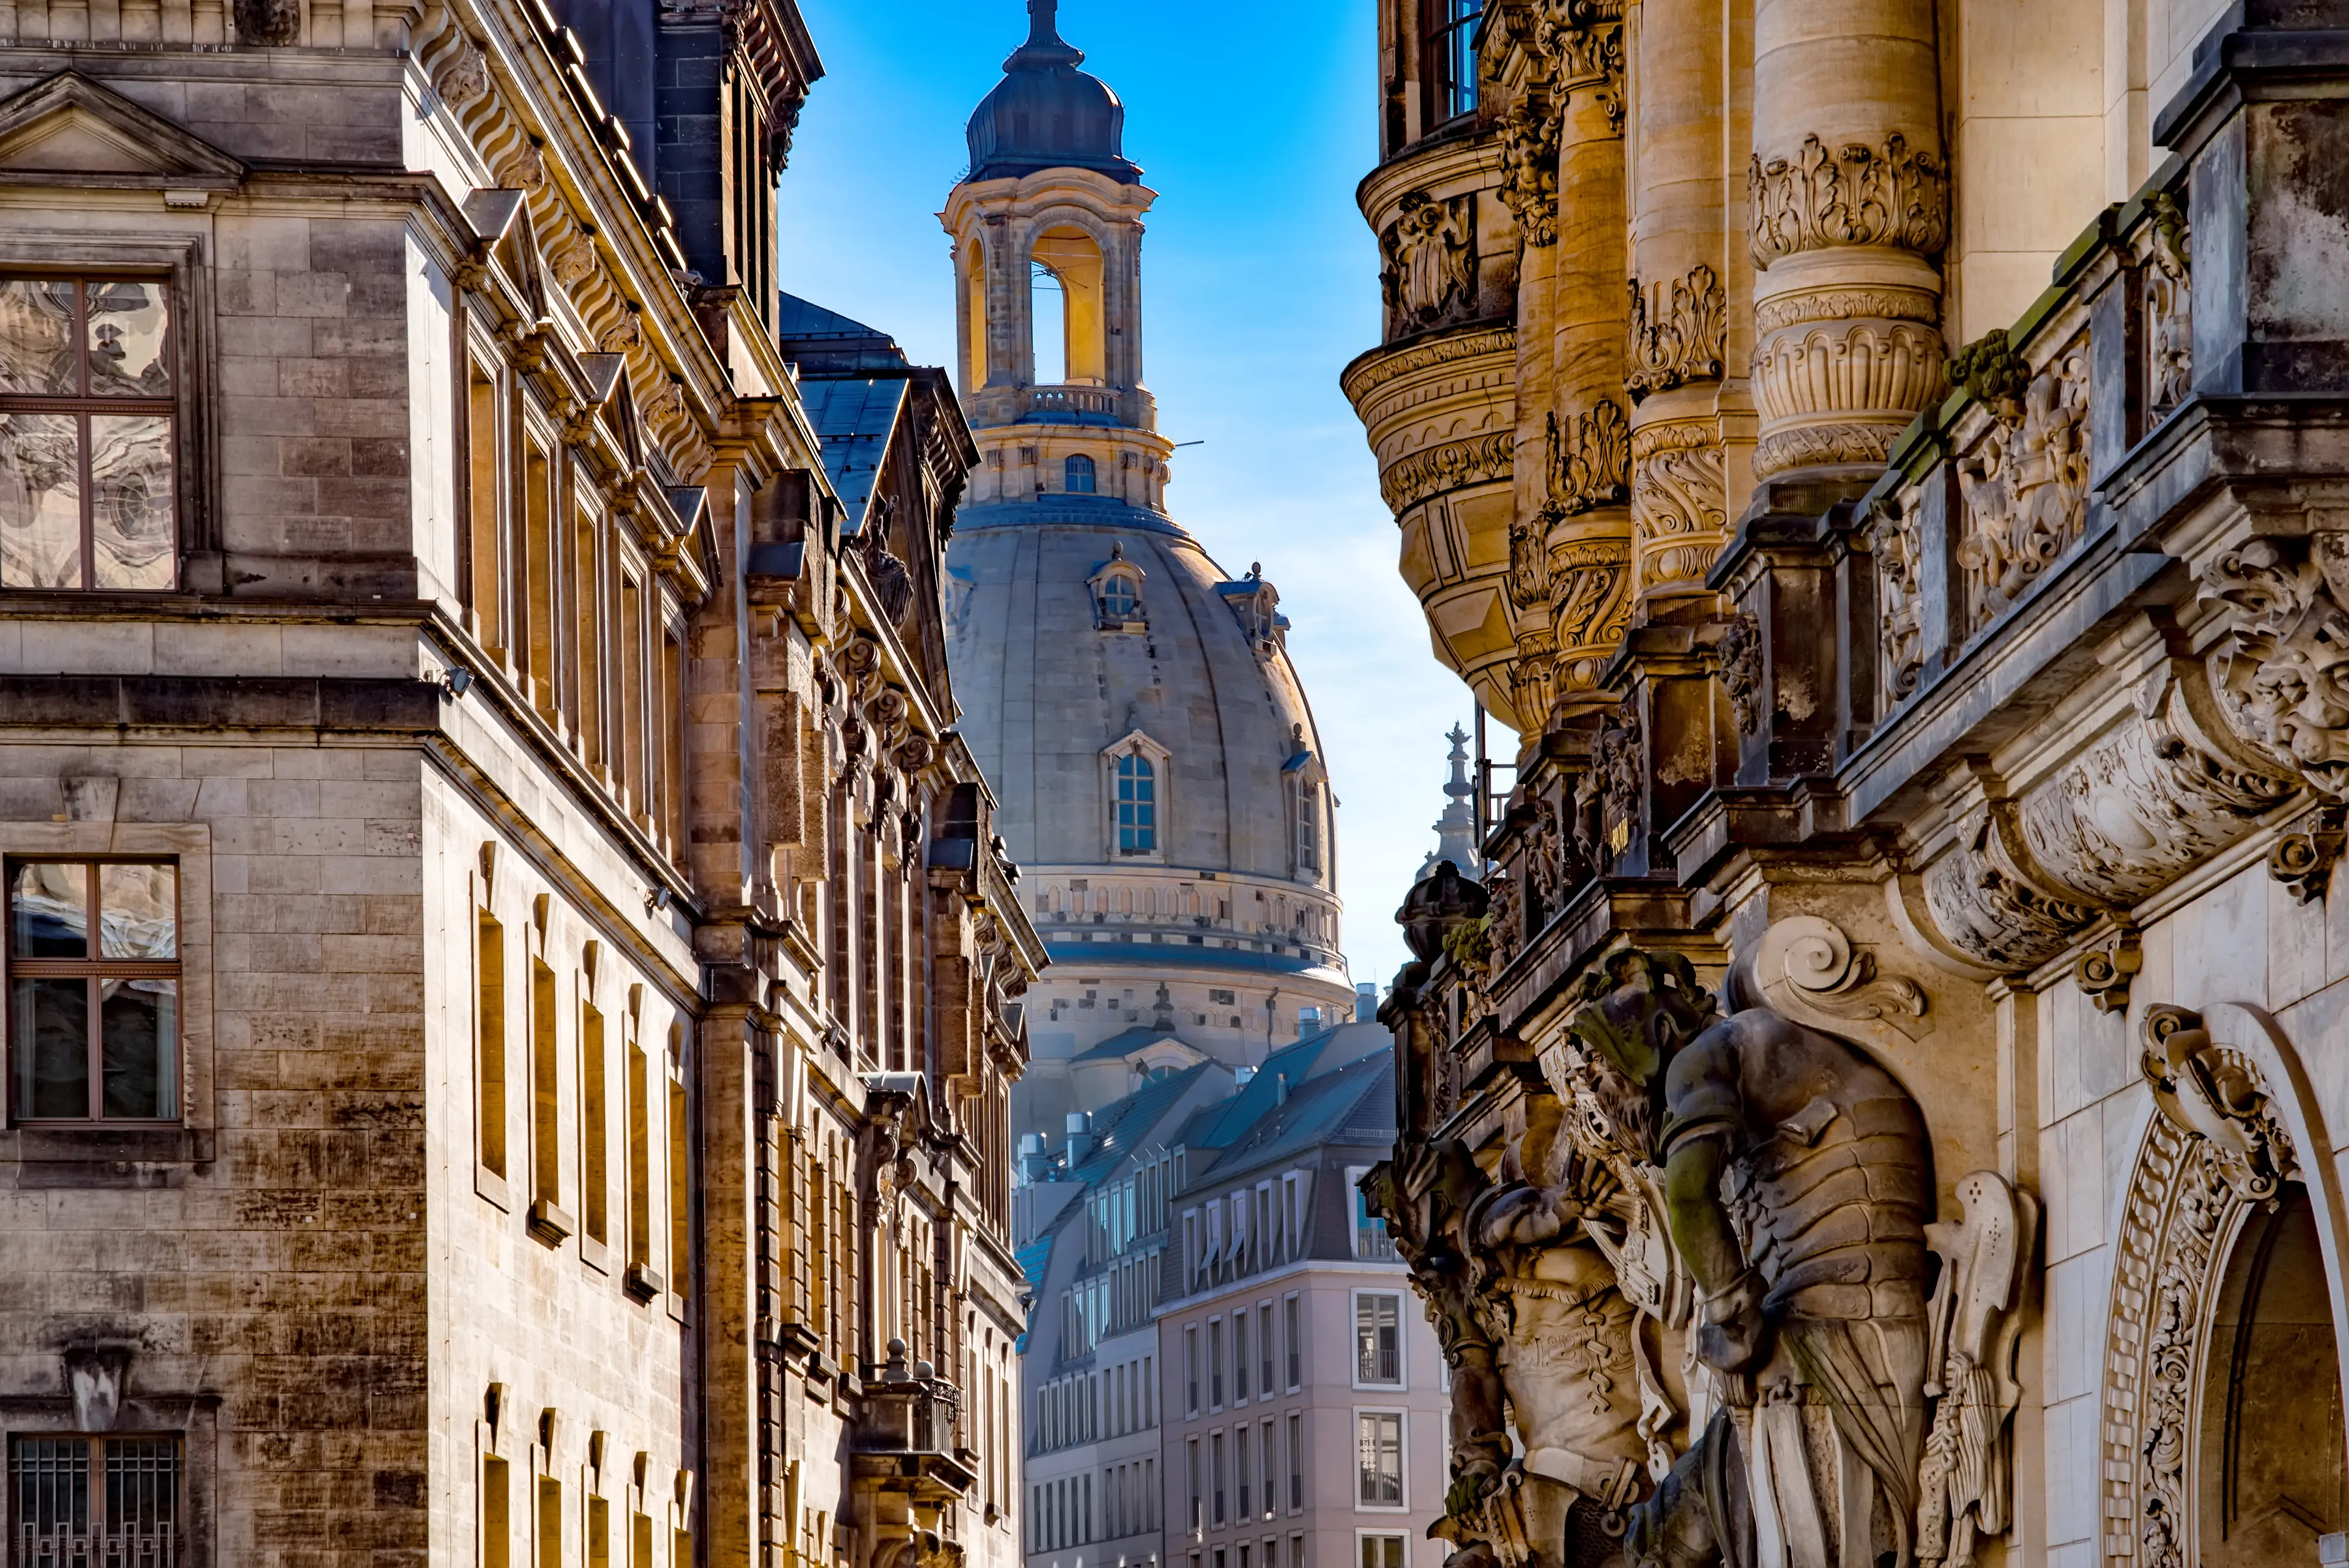 Frauenkirche and wall sculpture from Georgentor